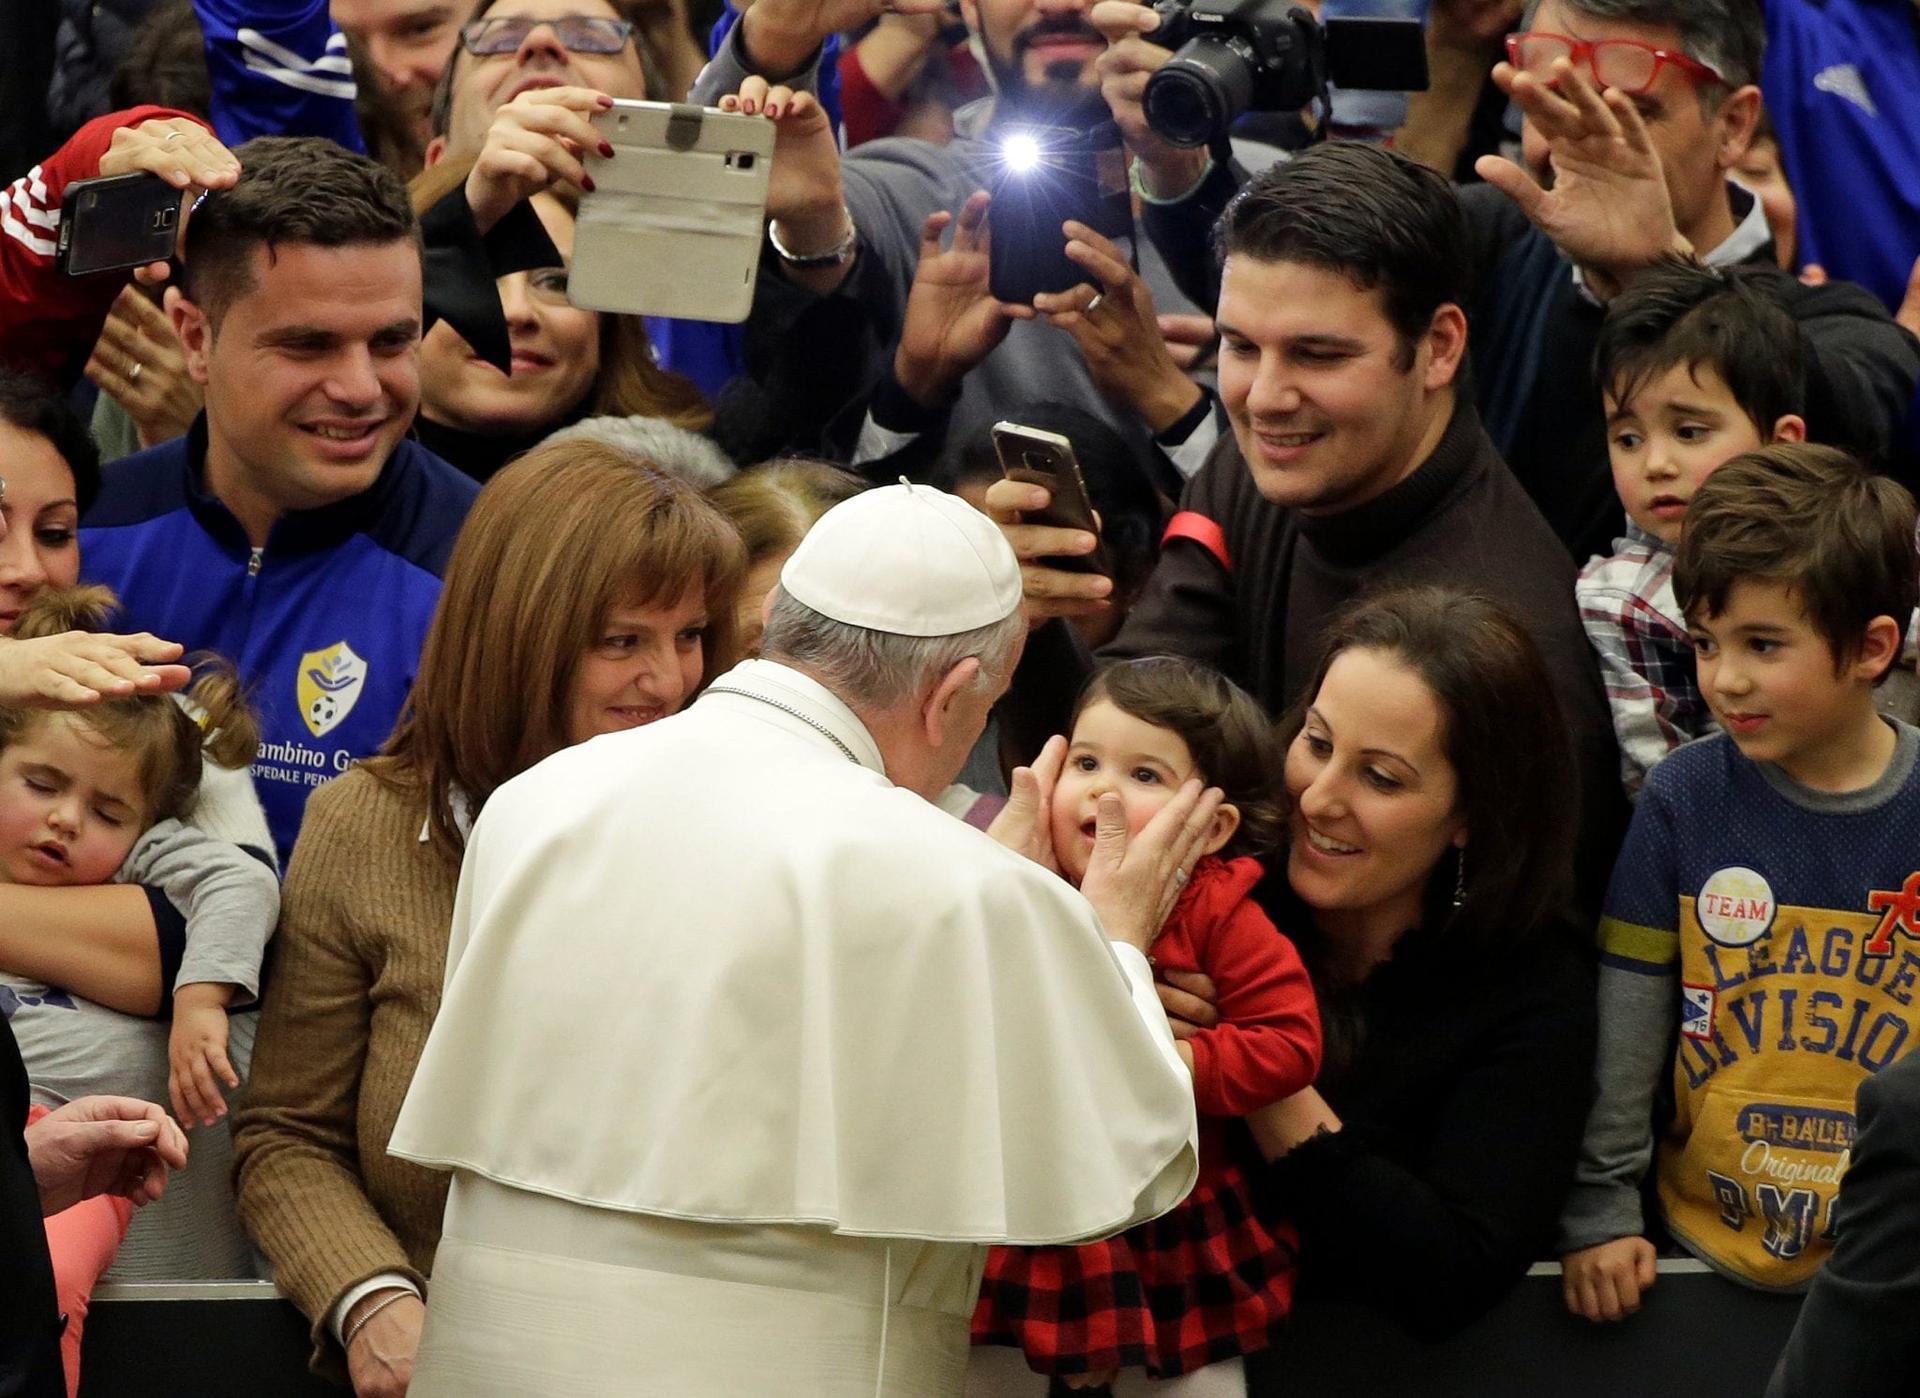 Corruption is cancer to health industry, pope tells hospital staffers